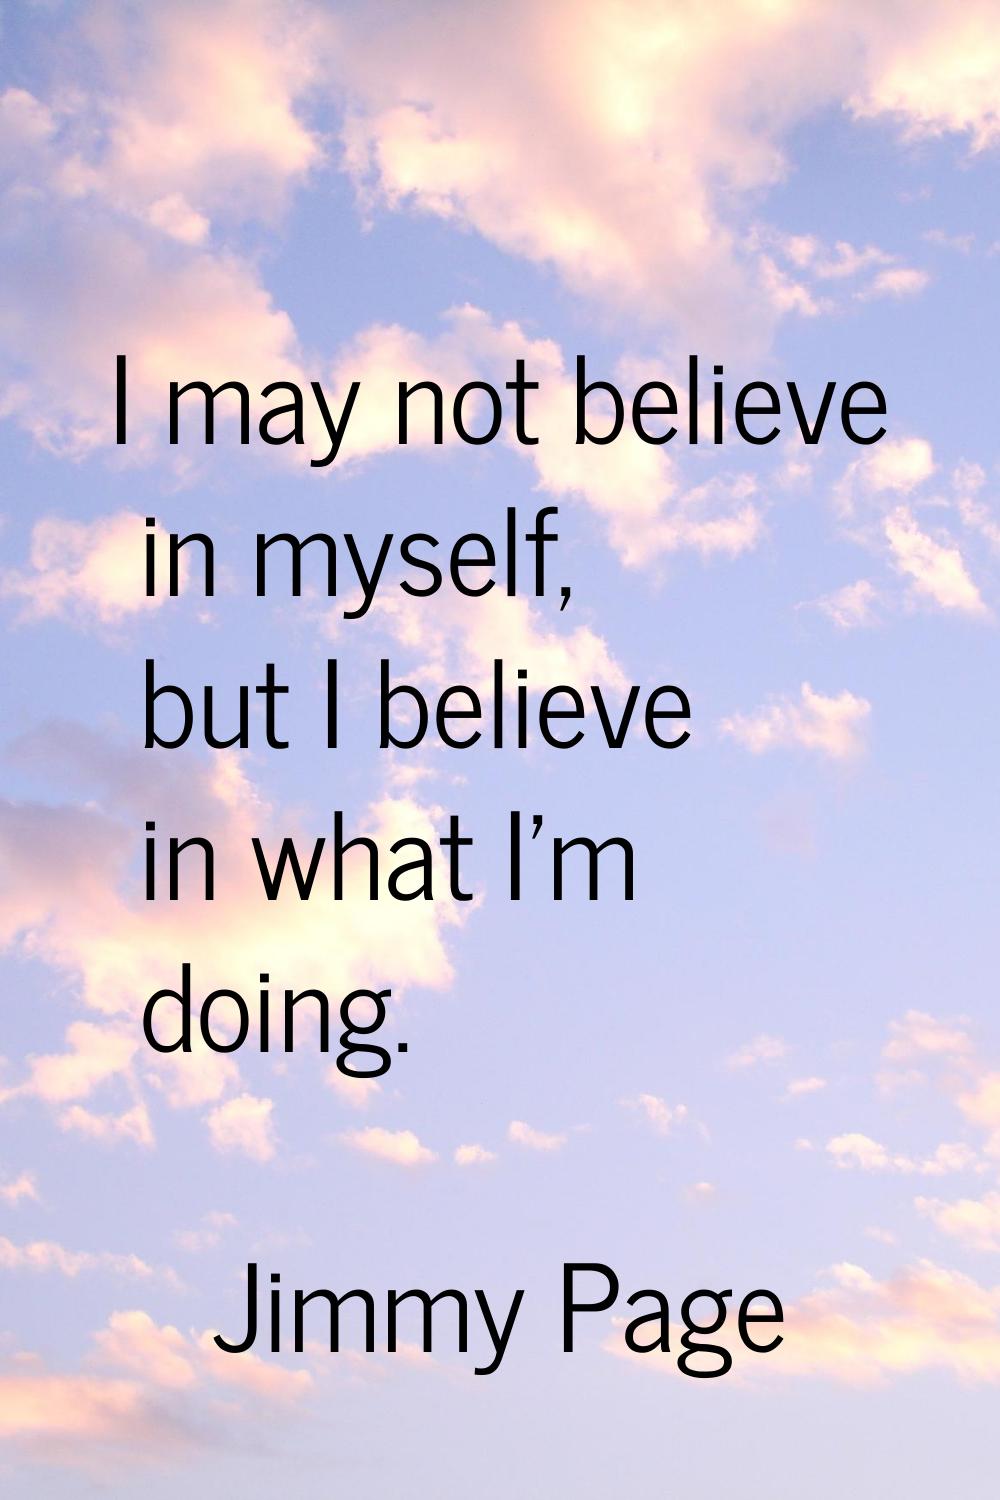 I may not believe in myself, but I believe in what I'm doing.